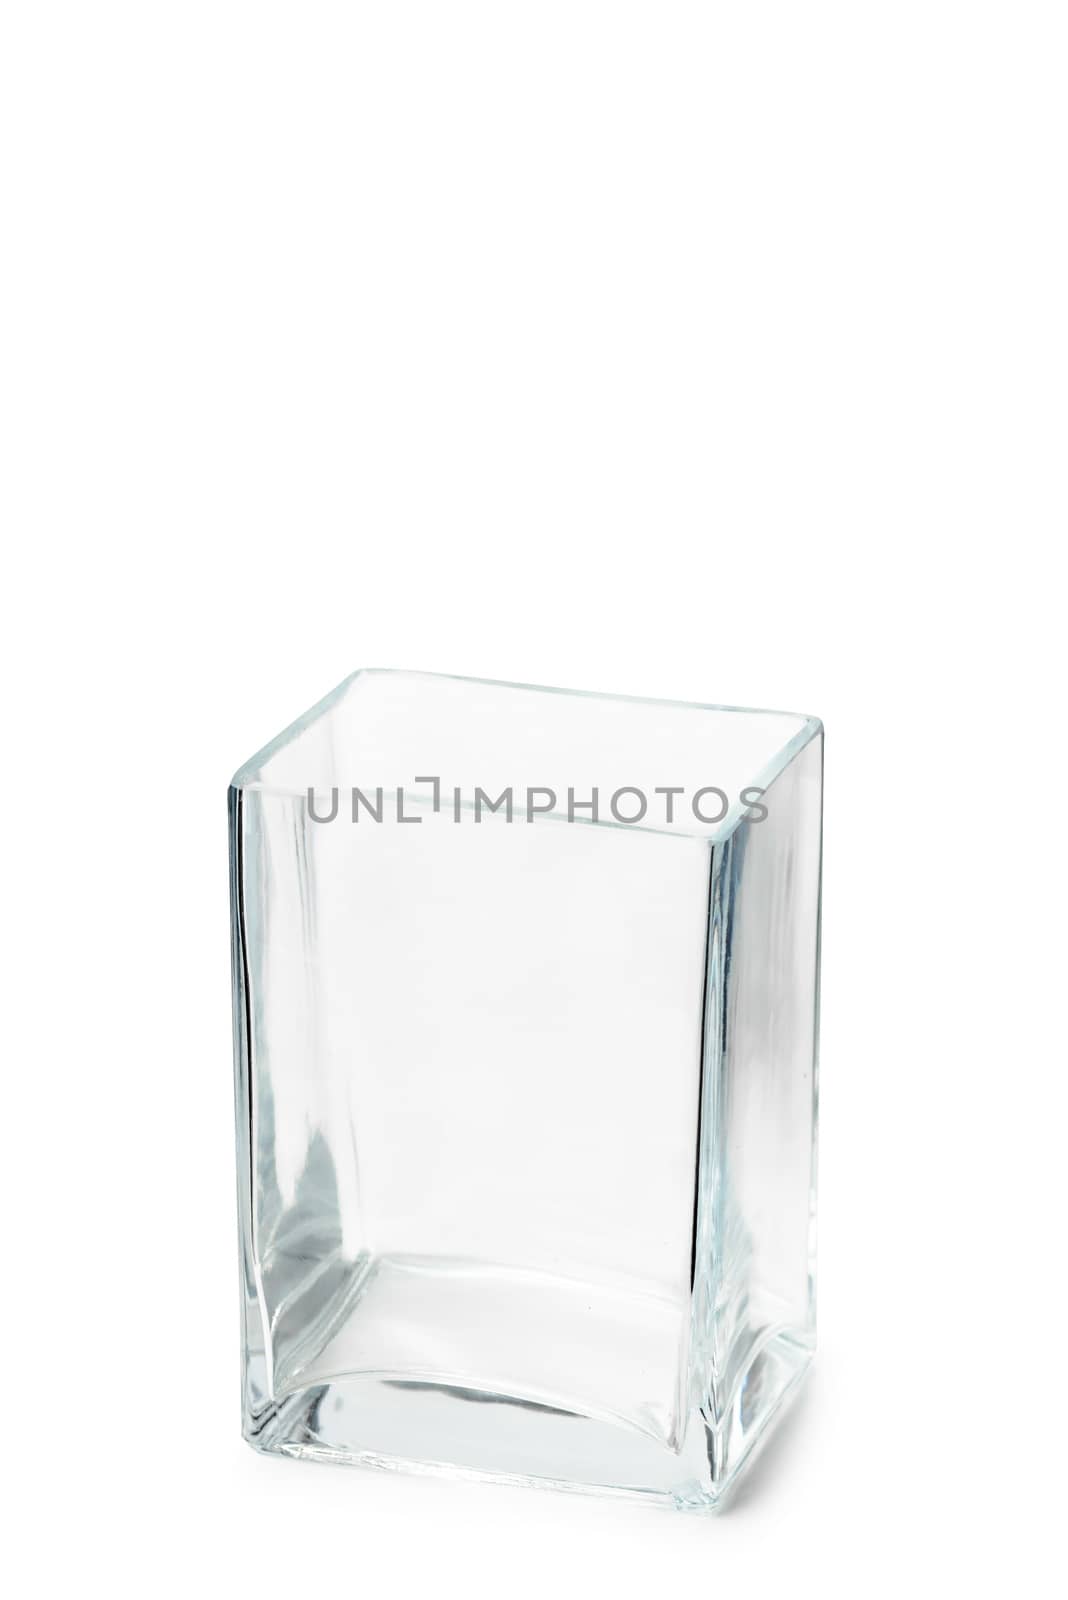 An empty Parallelepipedic transparent crystal vase isolated on white background